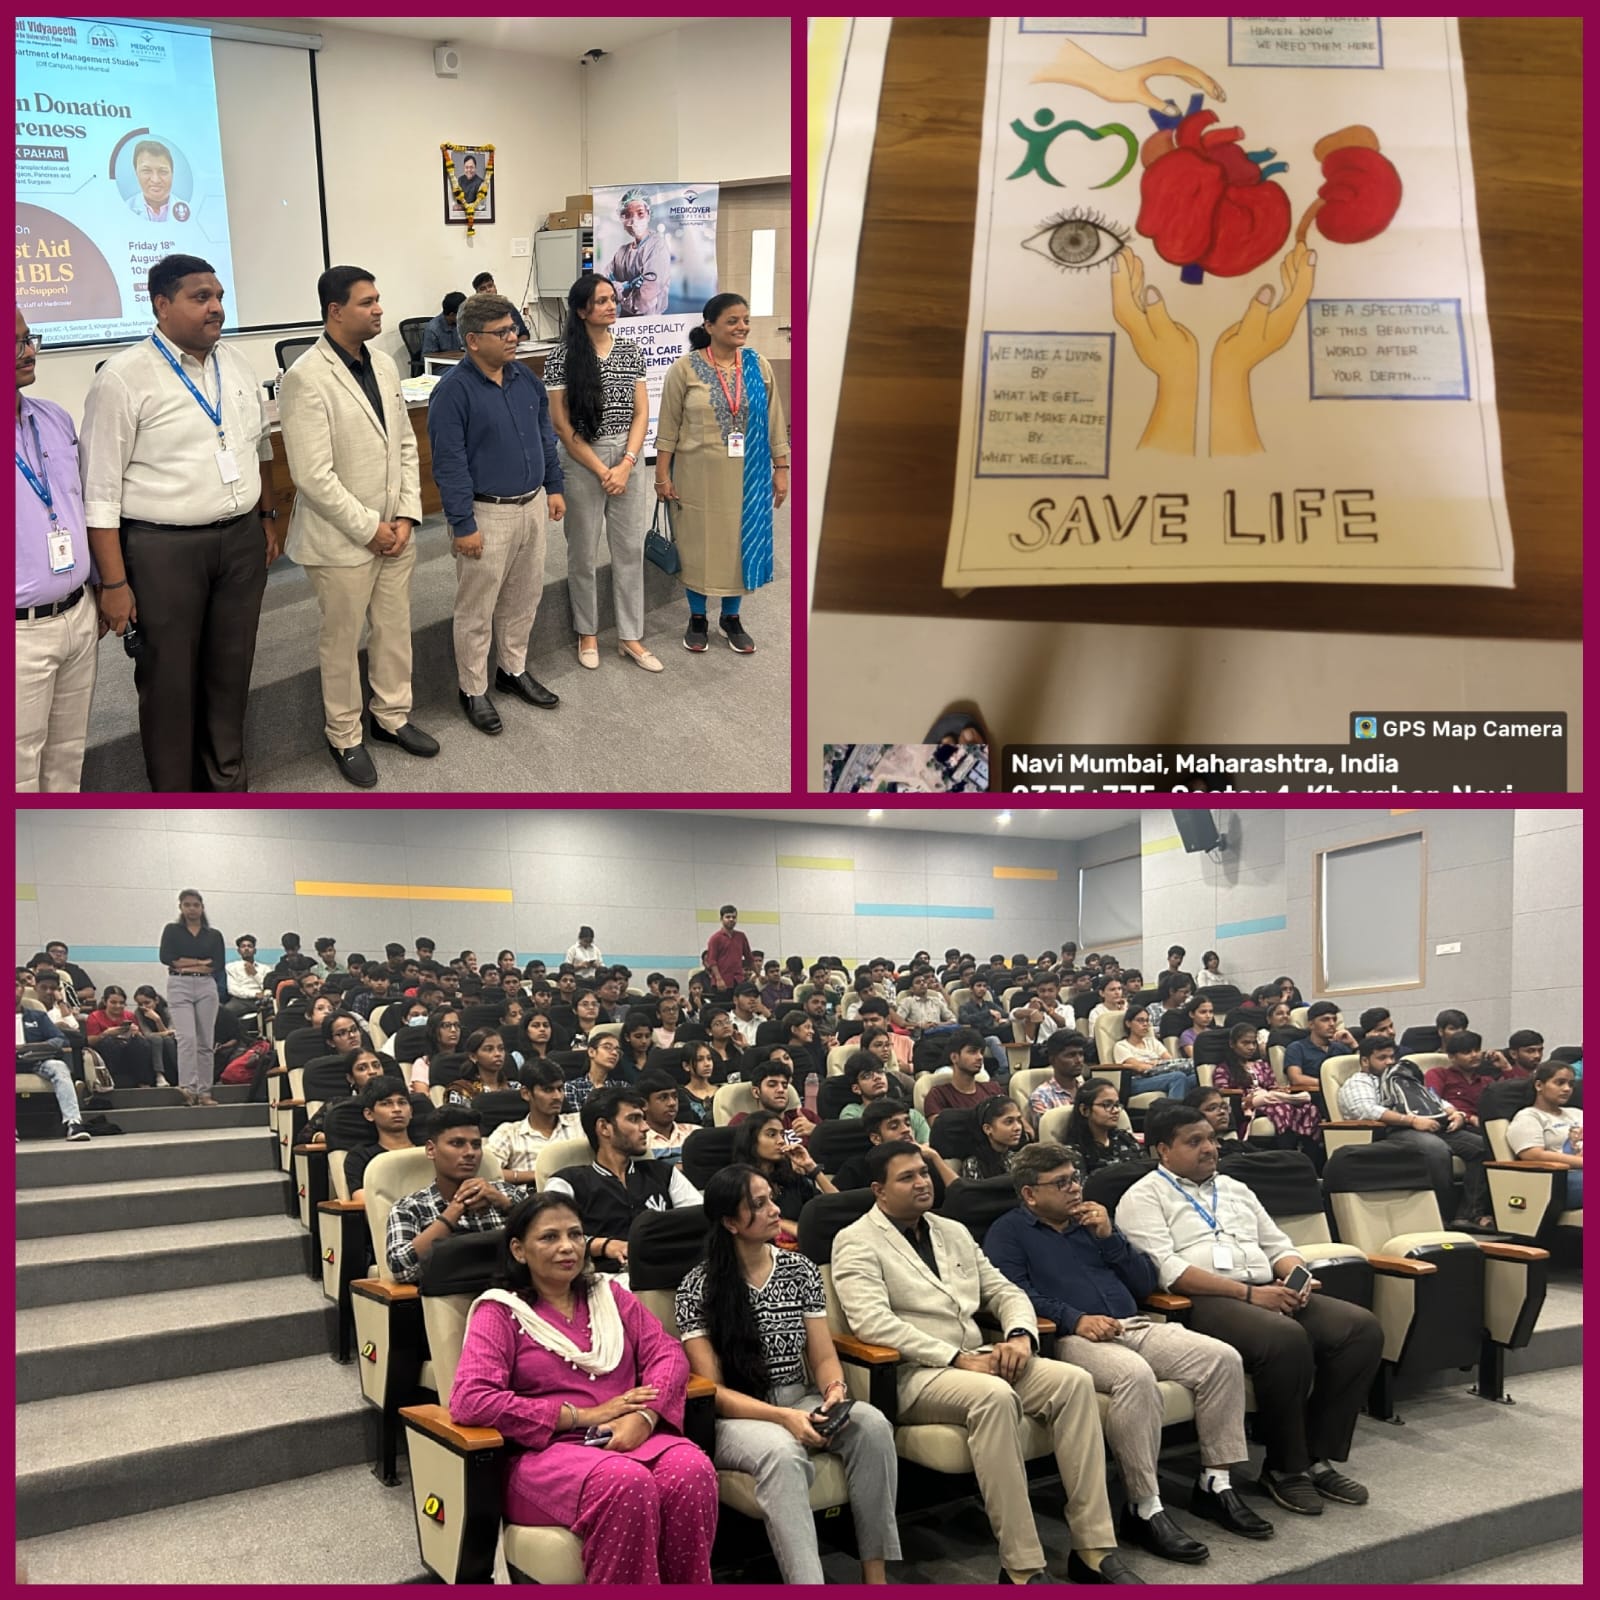 Corporate Resource Cell organised a very informative session on Organ Donation Awareness and Basic Life Support on Friday